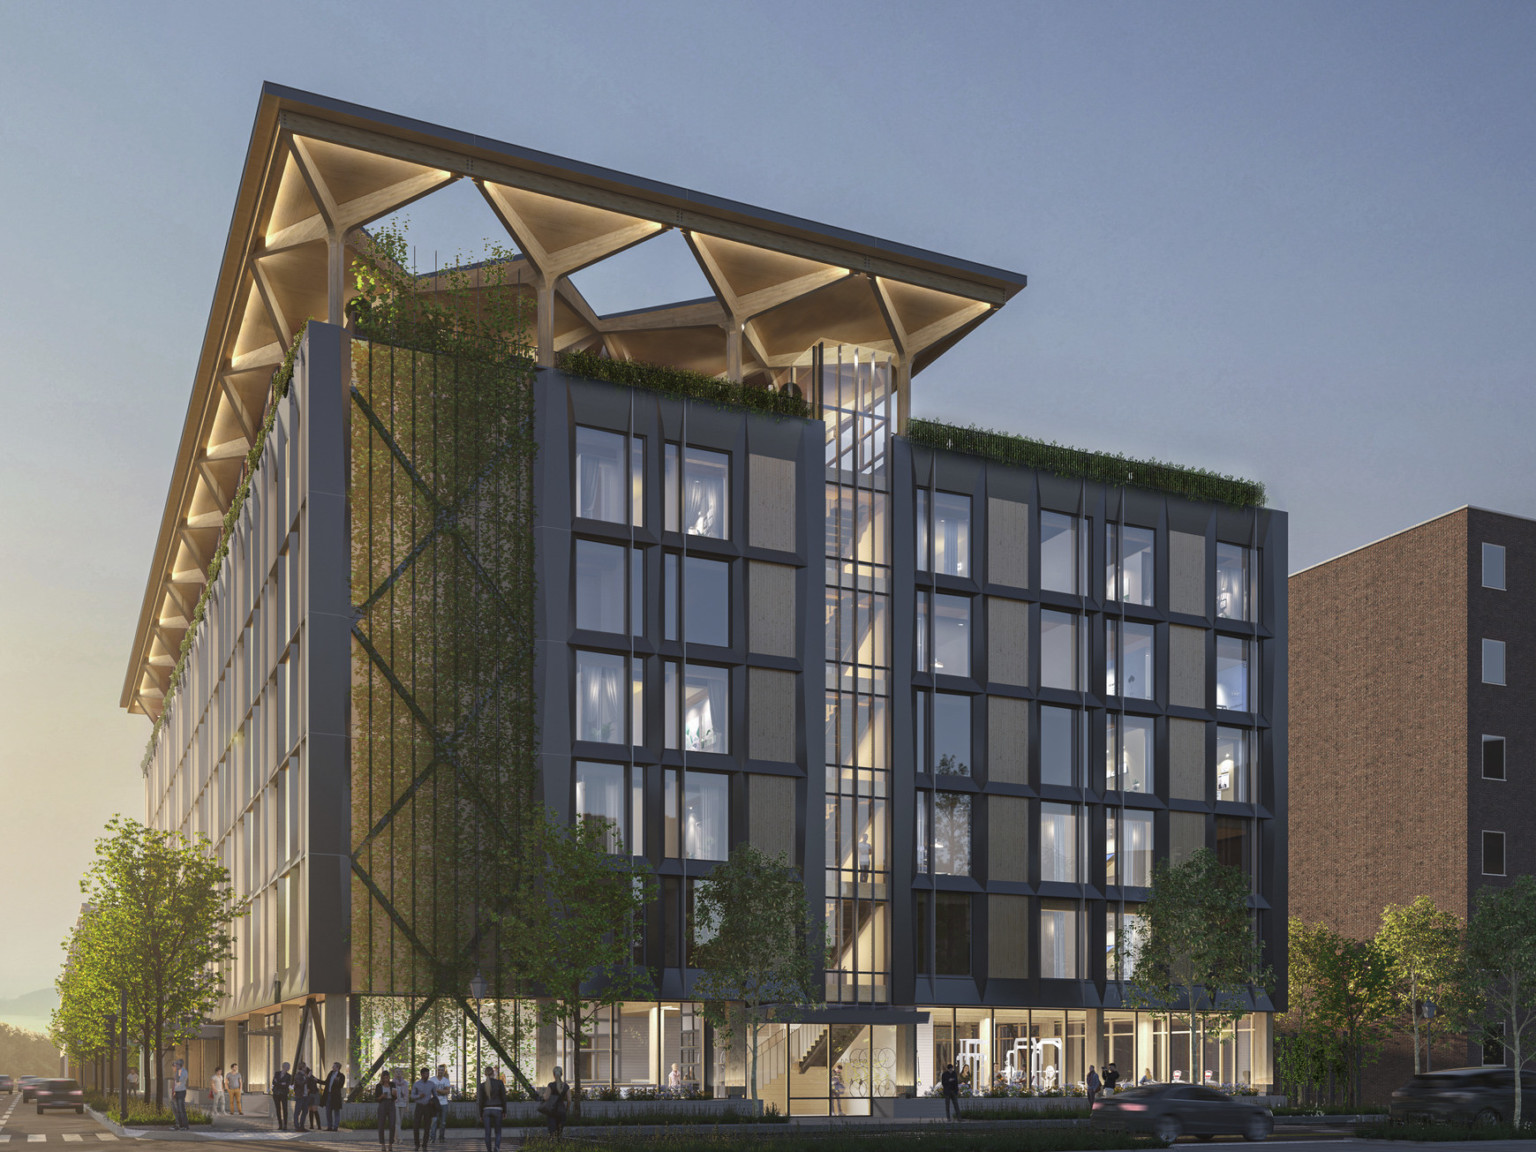 A mass timber midrise hotel with a blackened steel façade and timber infill with an arched timber canopy on a glassed-in rooftop